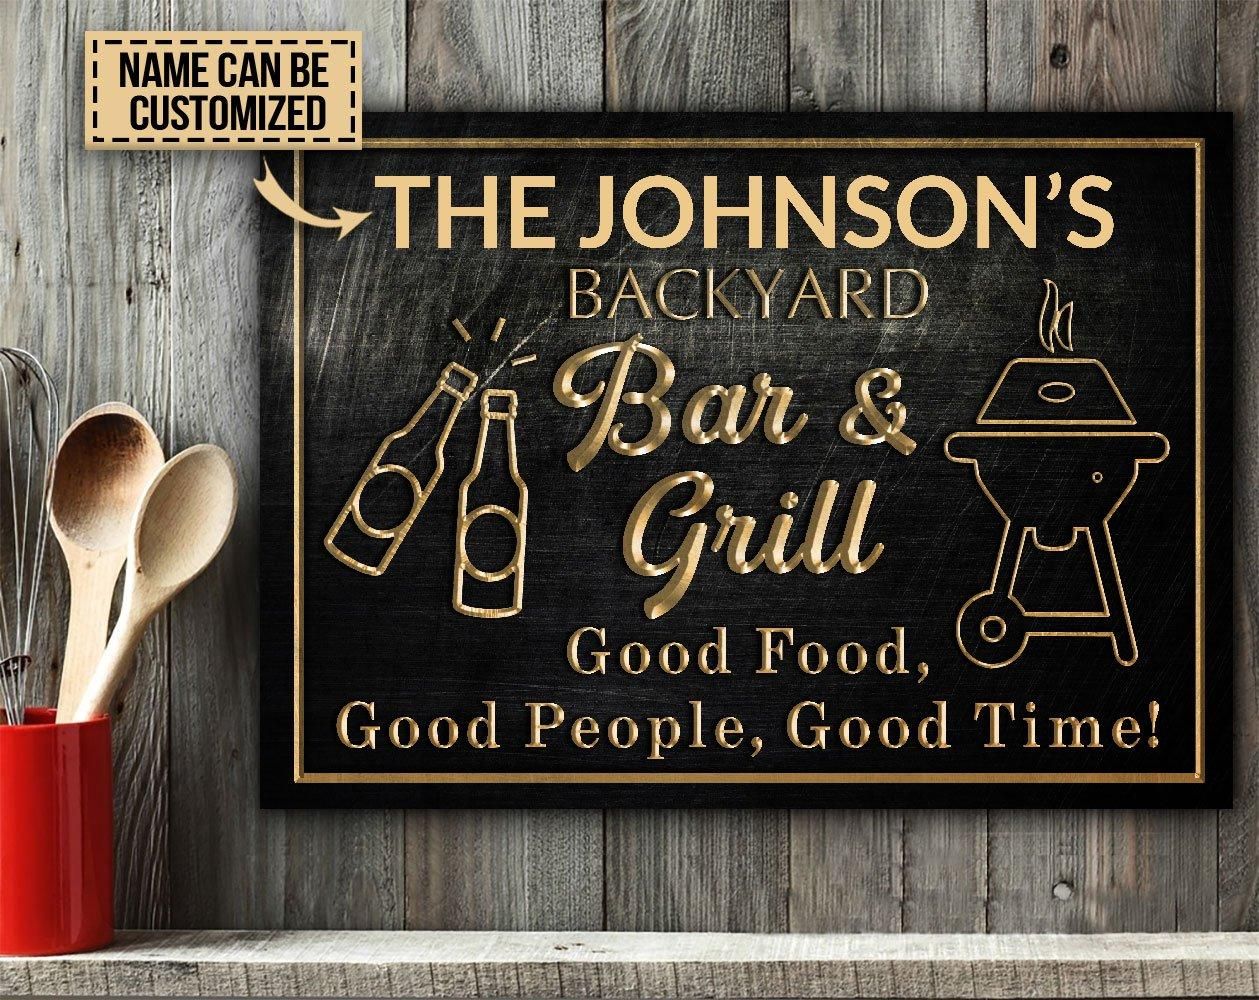 Personalized Grilling Backyard Good Food Customized Classic Metal Signs PAN